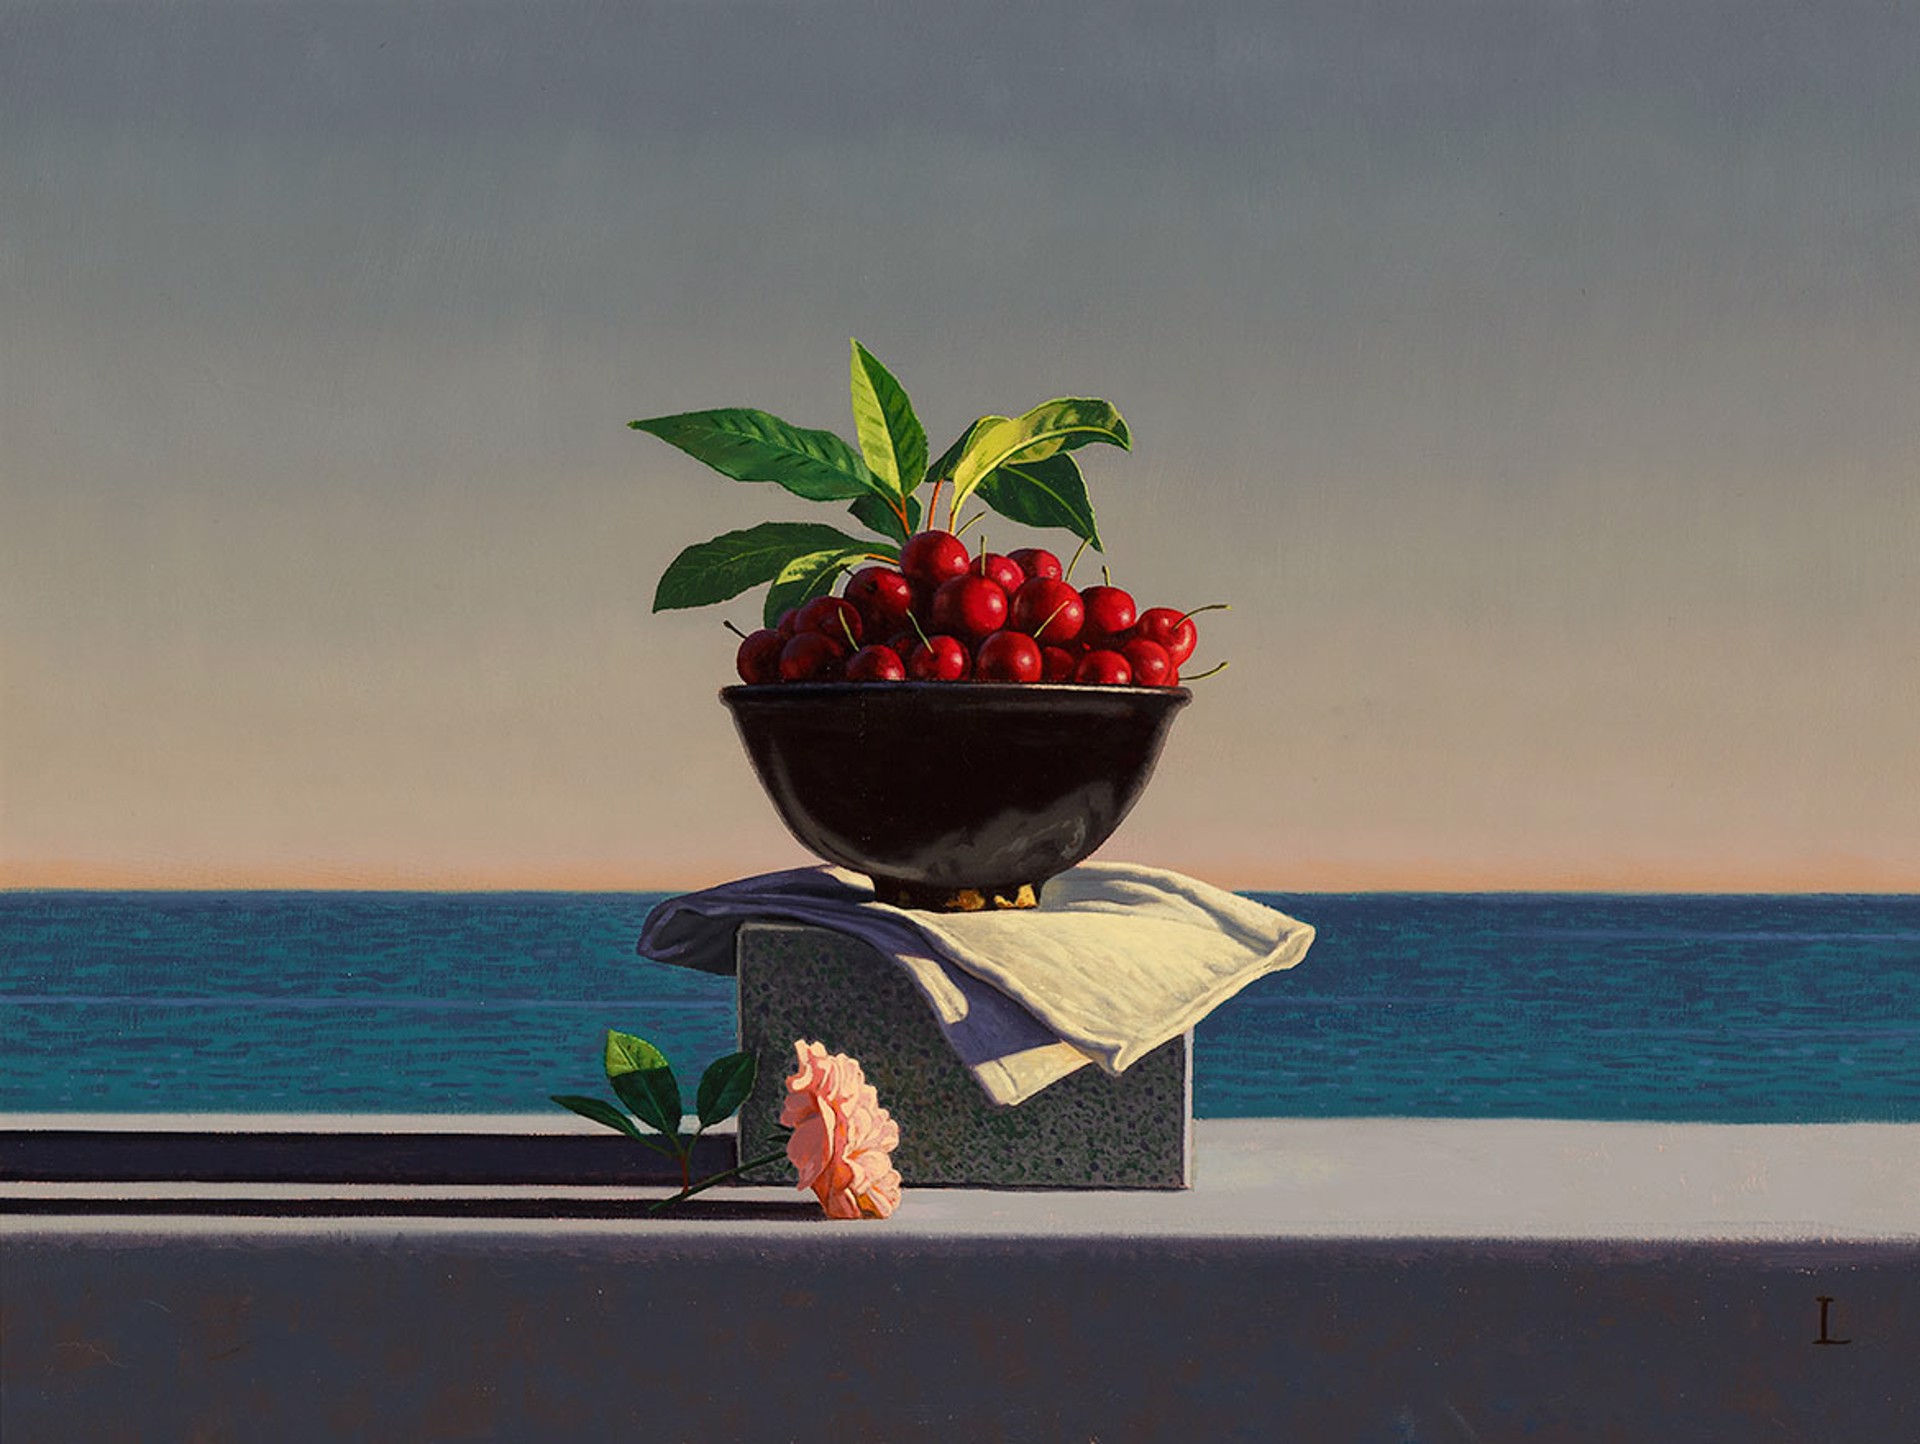 Offering: Cherries and Rose by David Ligare